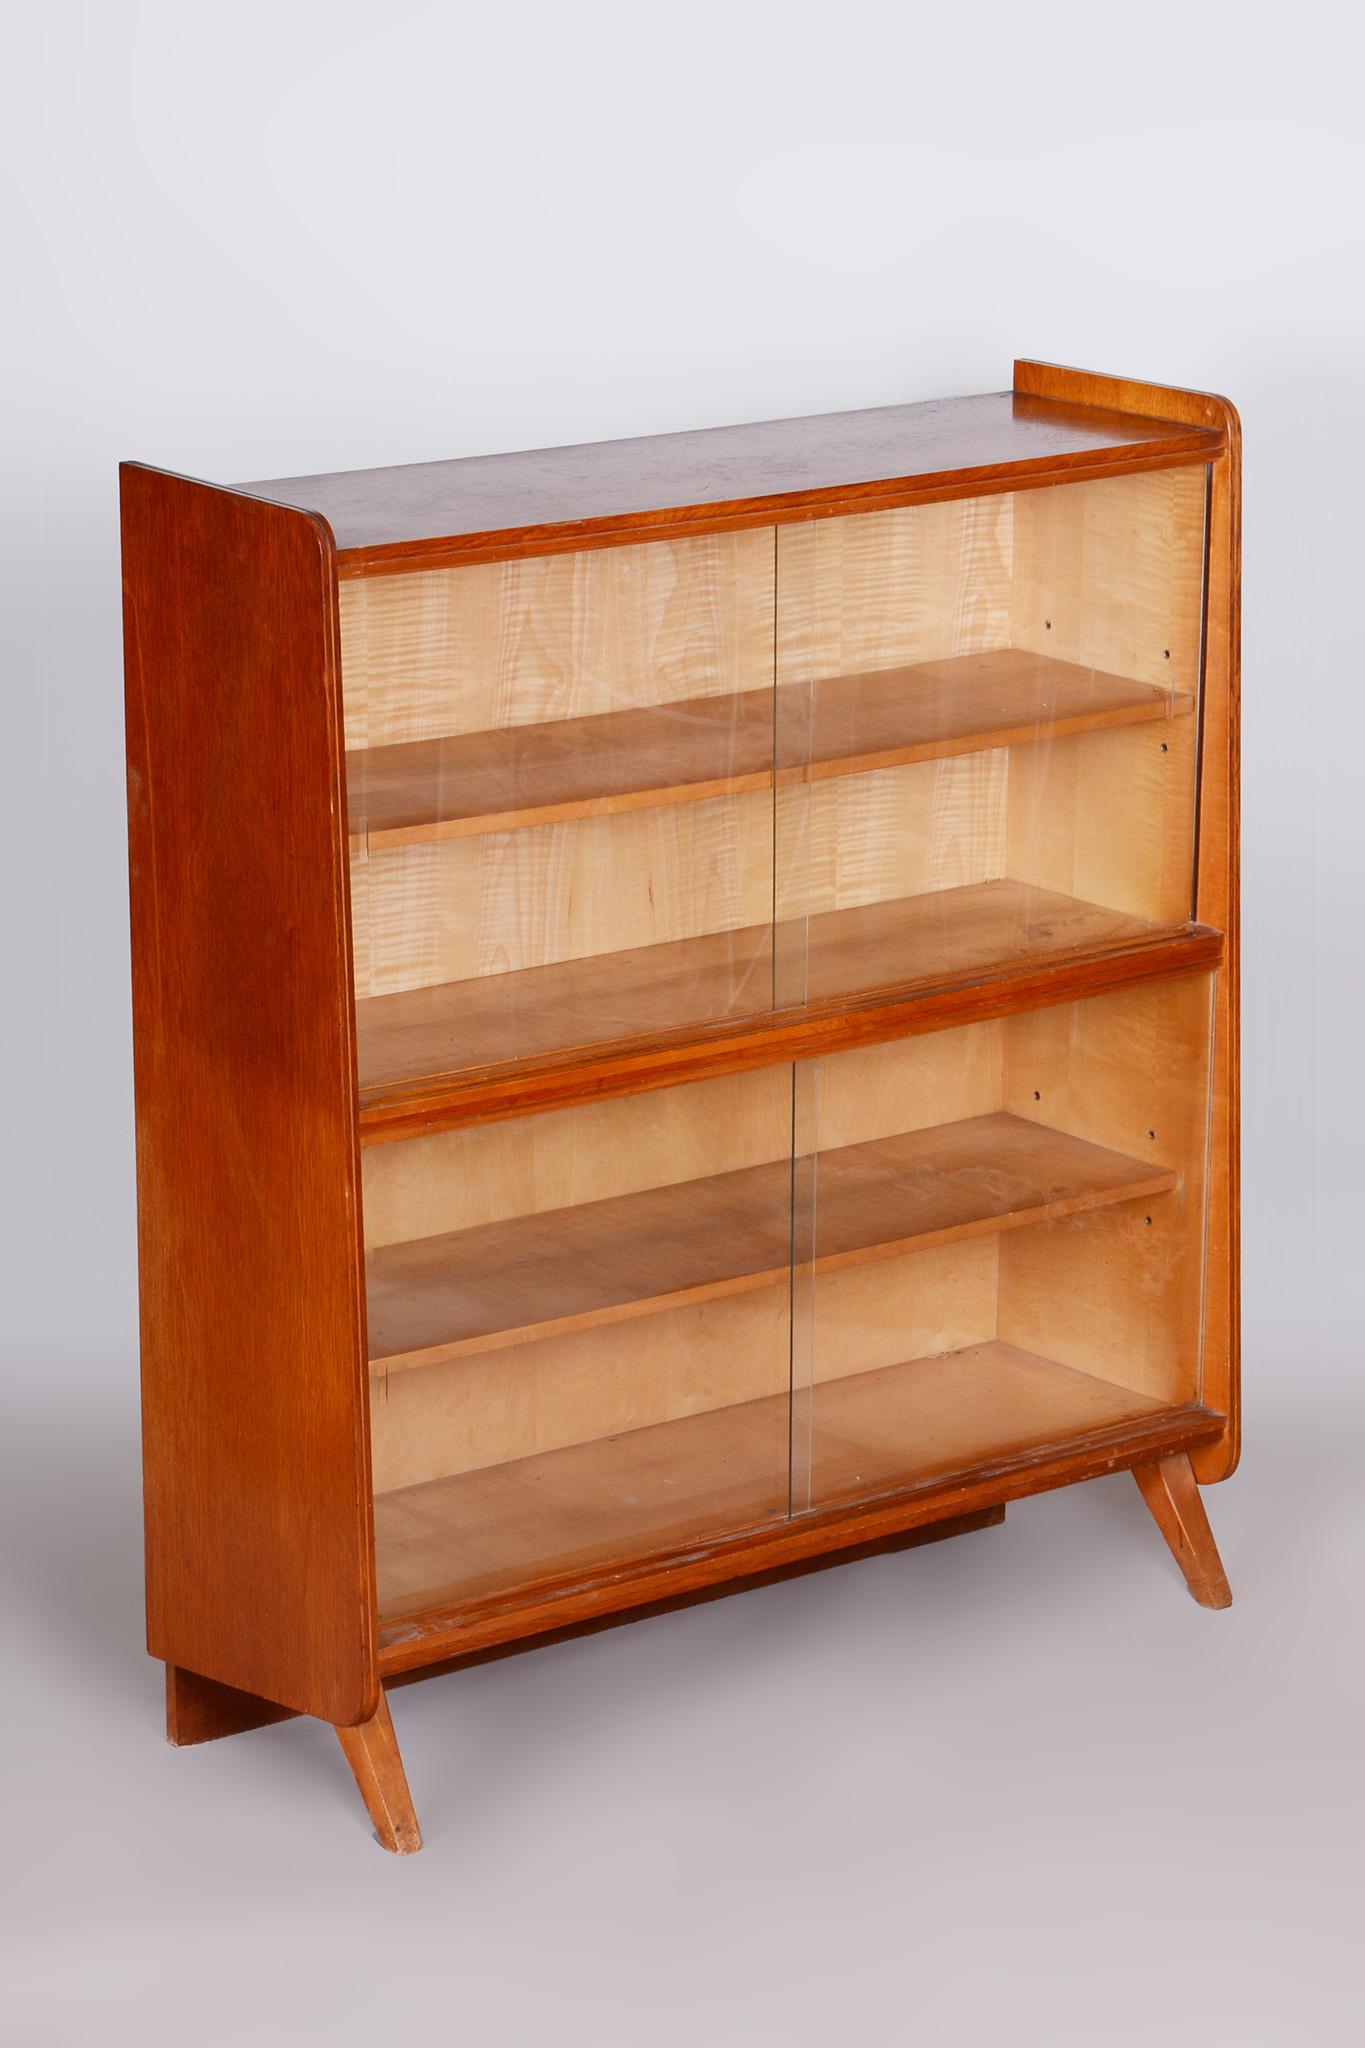 Restored Midcentury Oak Bookcase, Glass Doors, Revived Polish, Czechia, 1950s In Good Condition For Sale In Horomerice, CZ